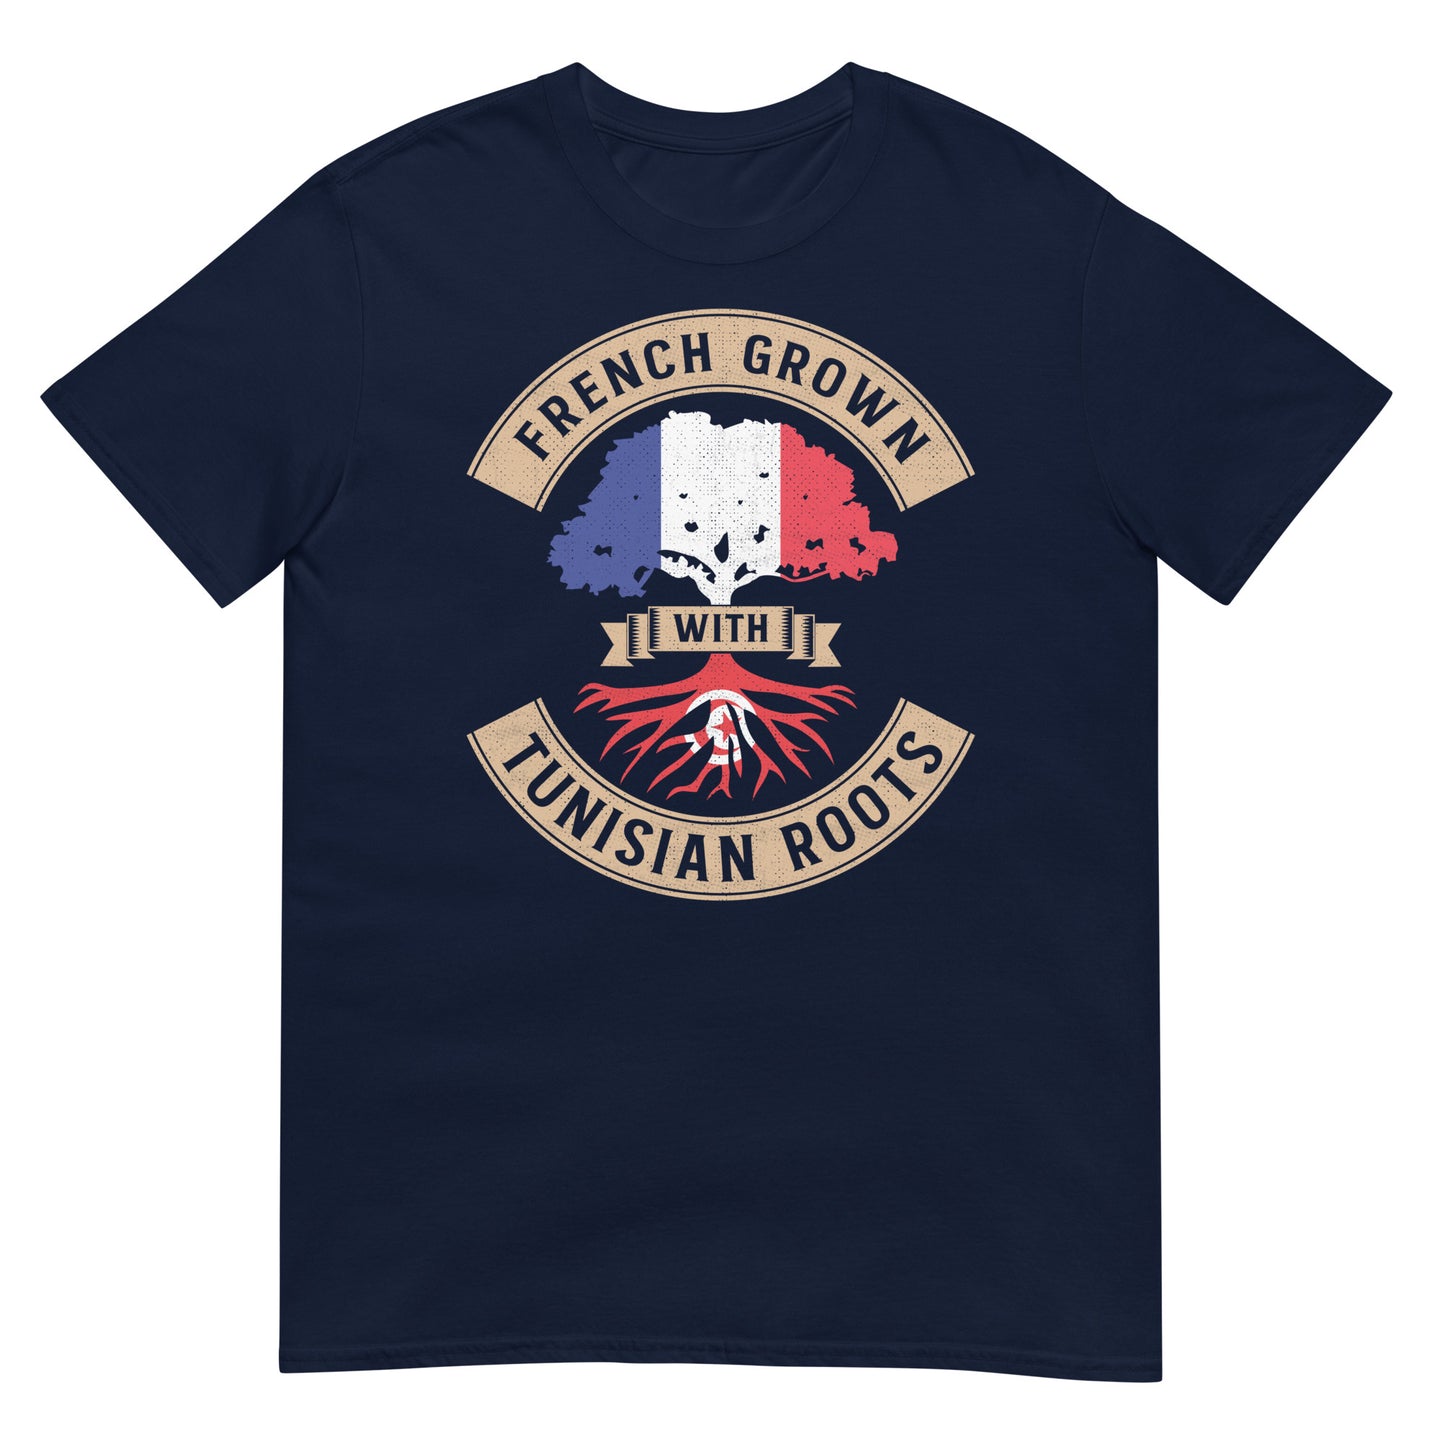 French Grown with Tunisian Roots - Unisex T-shirt